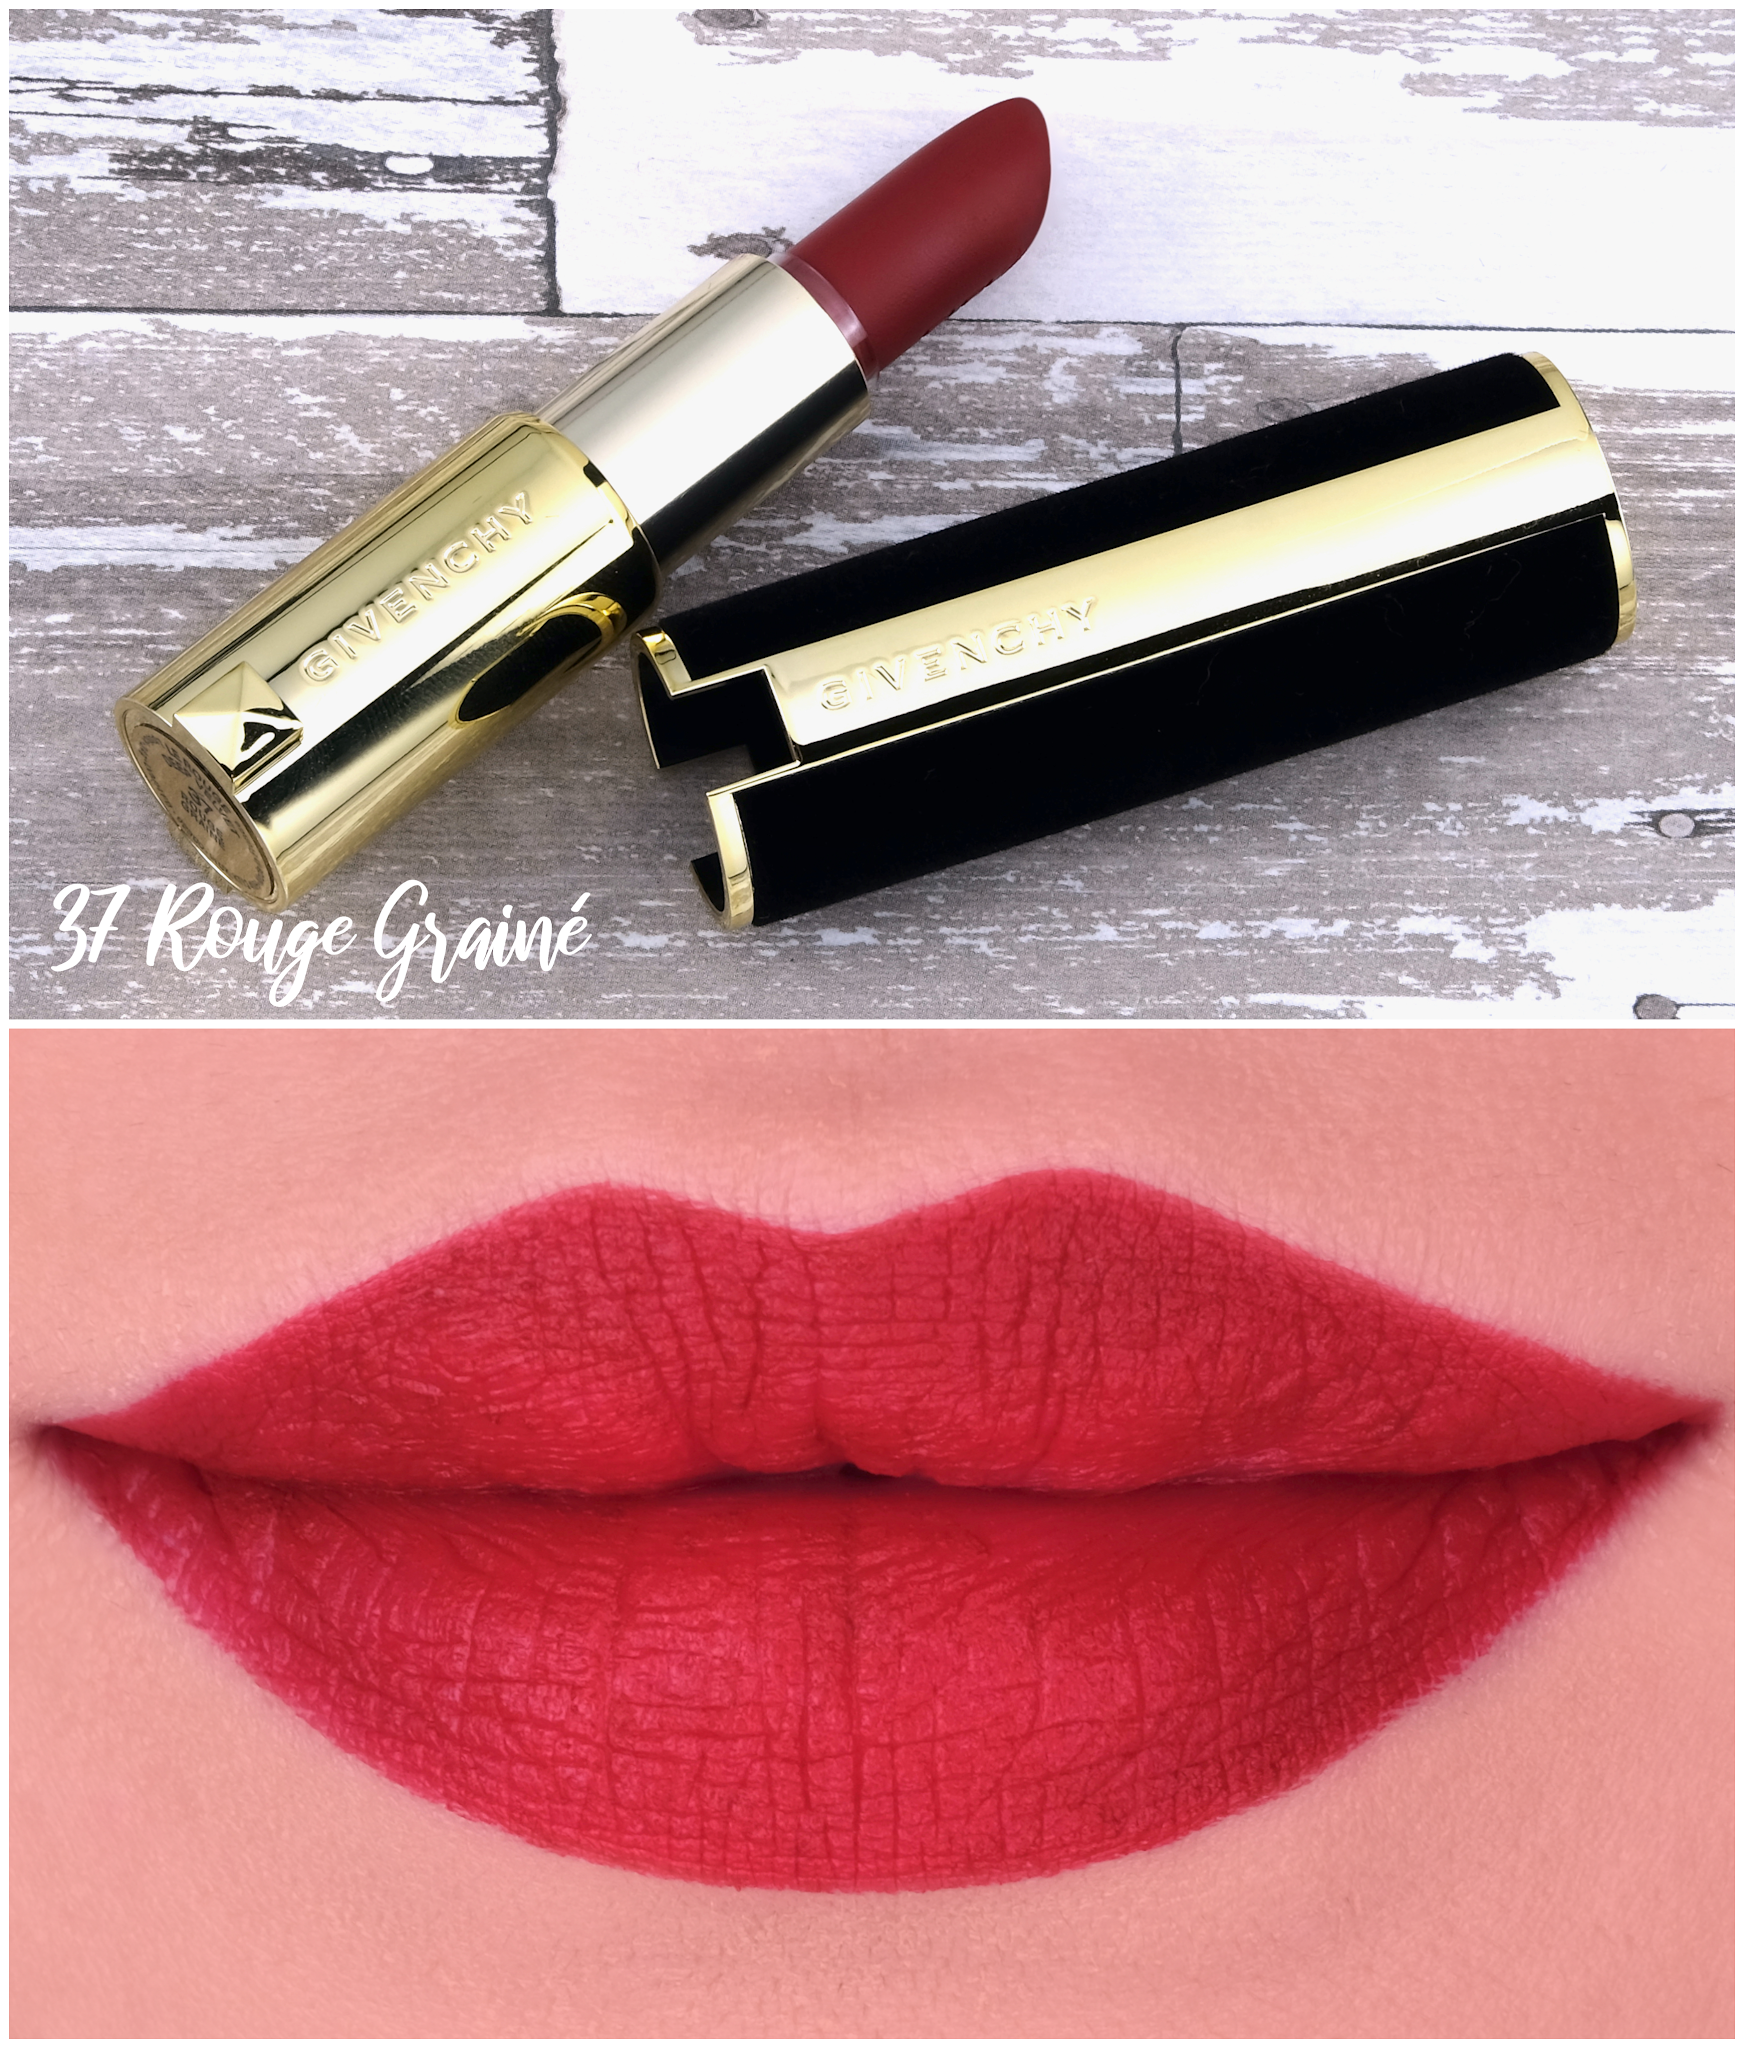 Givenchy | Holiday 2021 Le Rouge Deep Velvet Lipstick in "37 Rouge Grainé": Review and Swatches